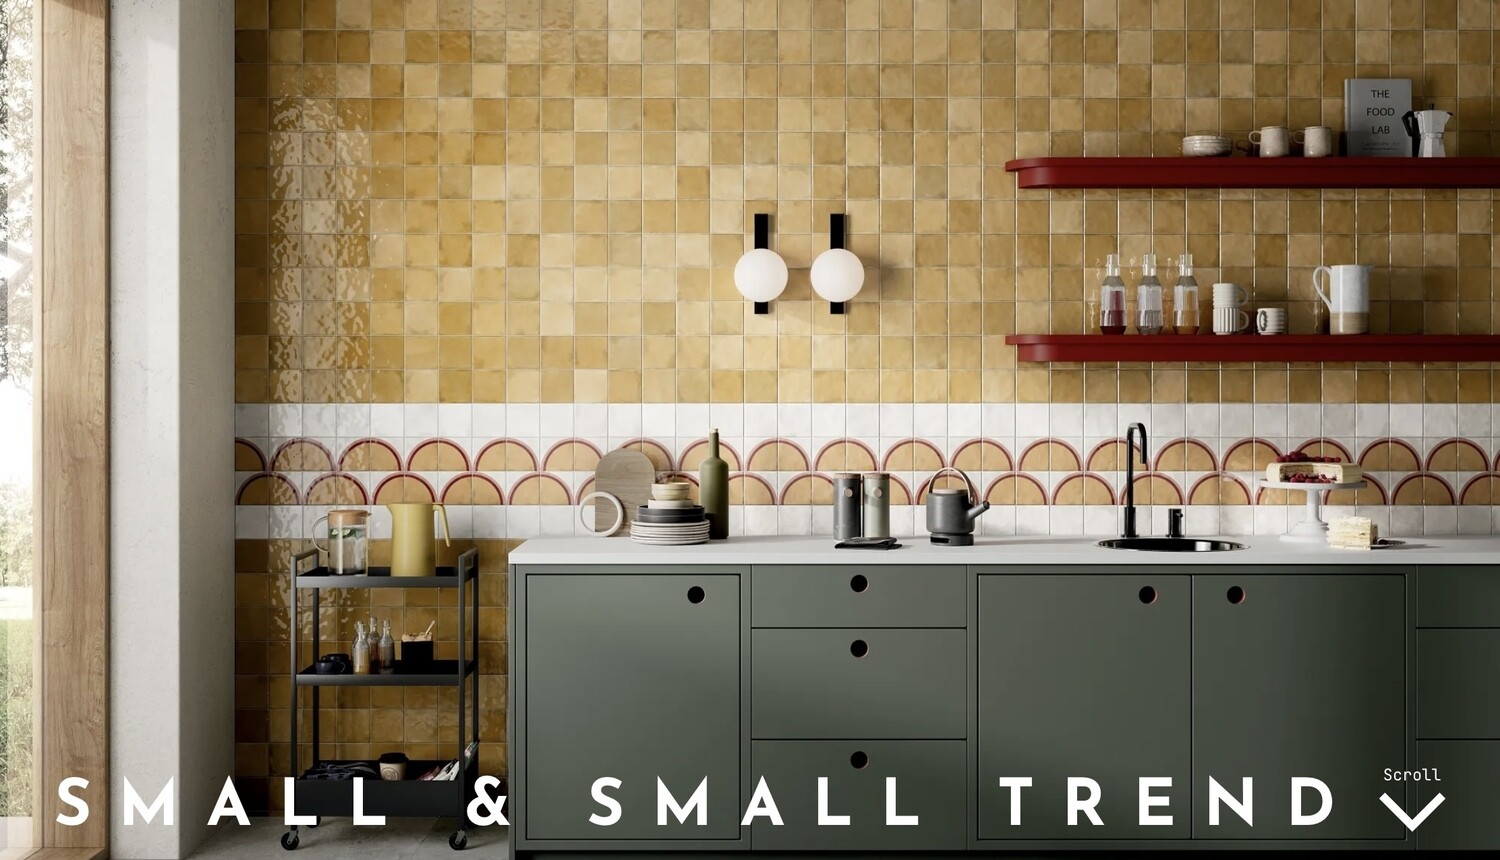 Small &amp; Small Trend Series (MW) 2.5x8 Decor - available in many patterns $10.99 SQFT